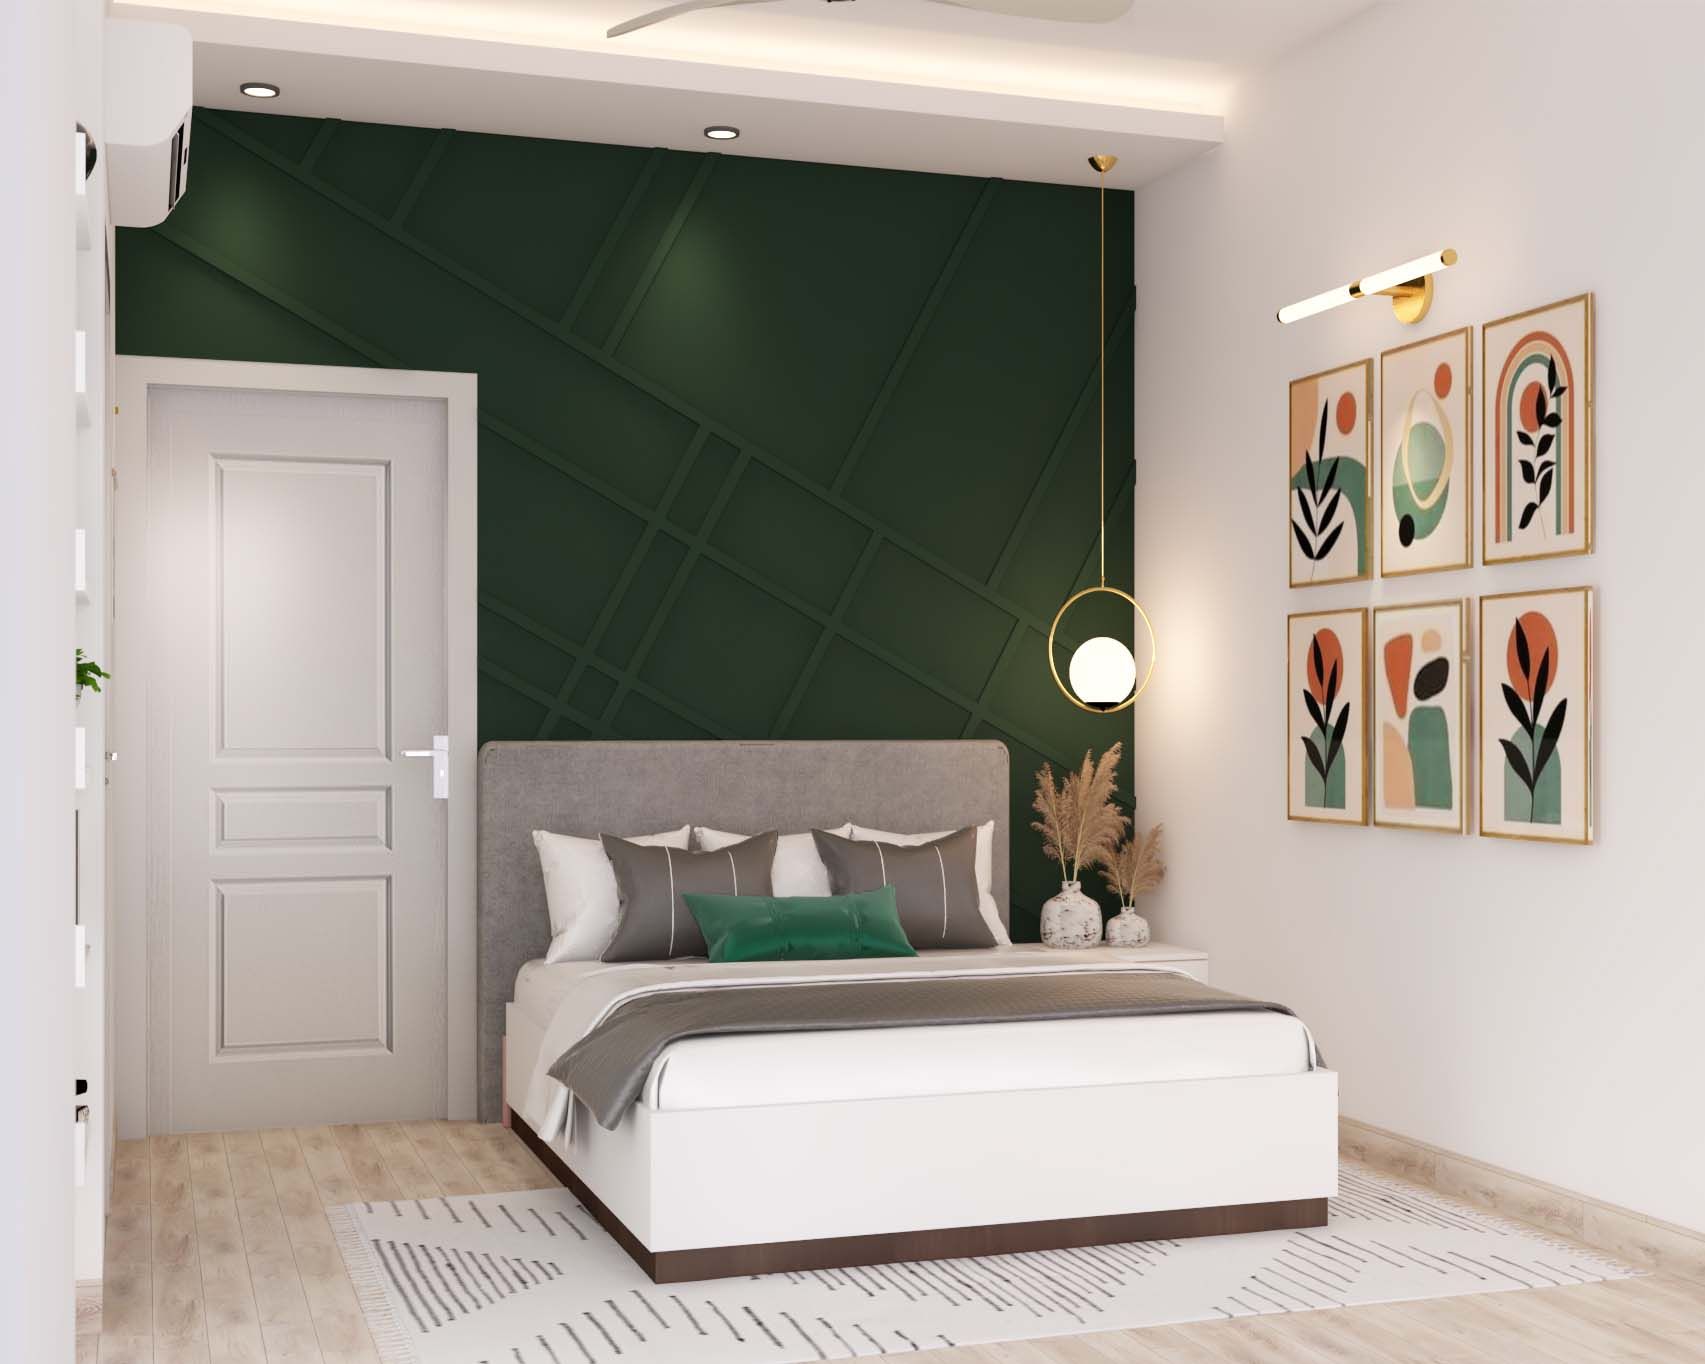 Contemporary Kids' Bedroom Design With A Green Accent Wall